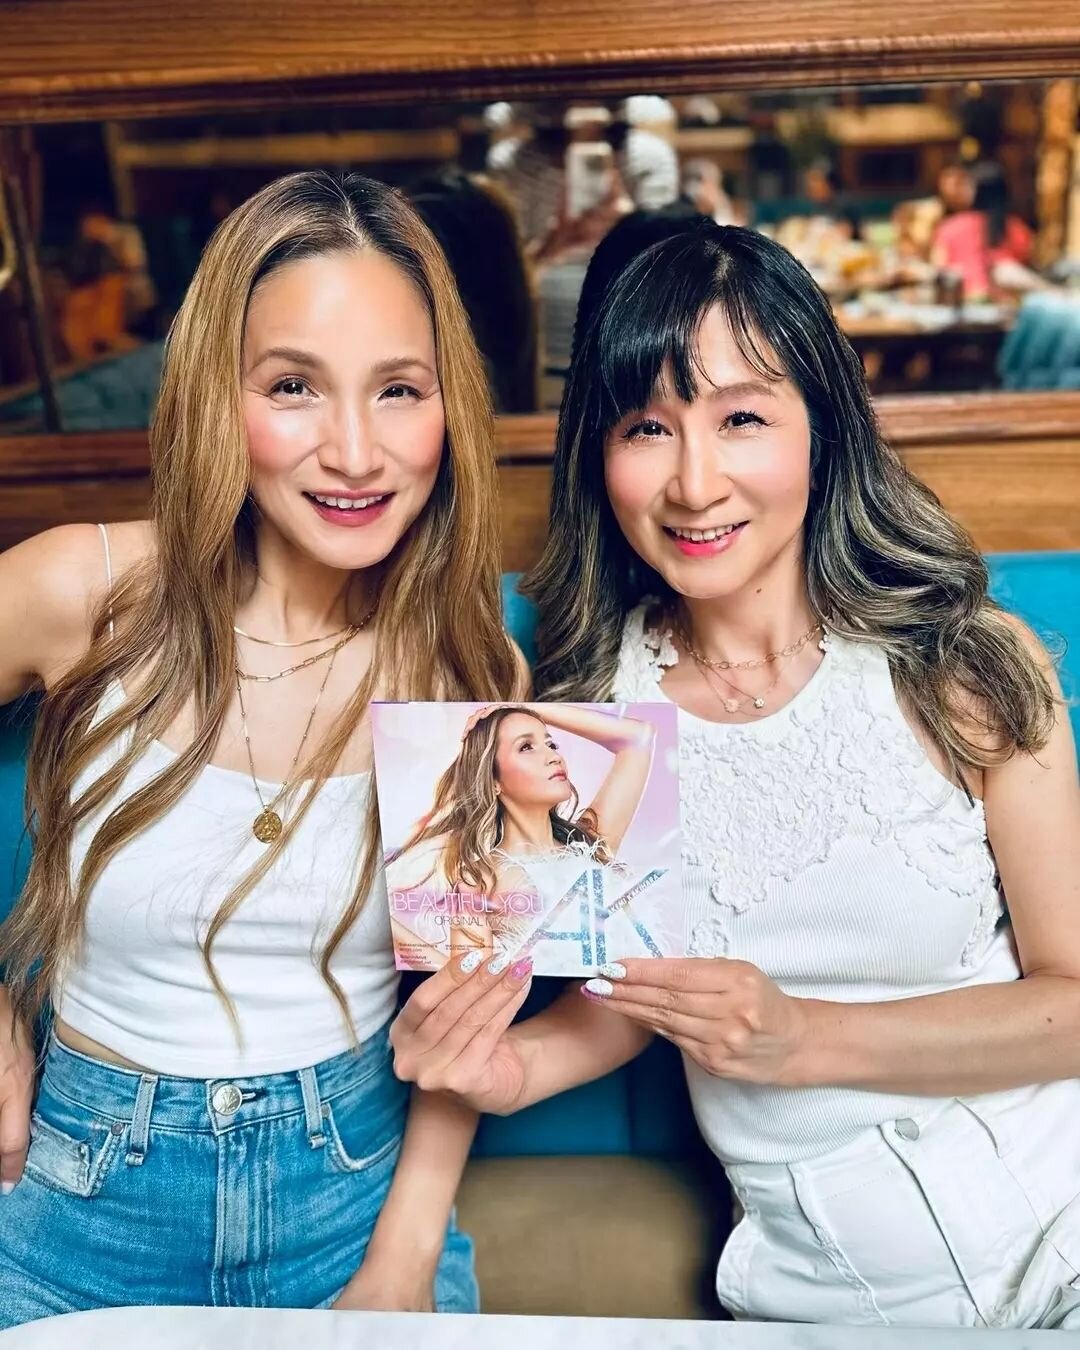 Amazing art director &amp; dearest friend @hino.junko, thank you for making a beautiful　cover artwork for my single as always🥰 Finally, my new 7&quot; Vinyl is available in stores worldwide including Japan! @akakemikakihara &quot;Beautiful You&quot;